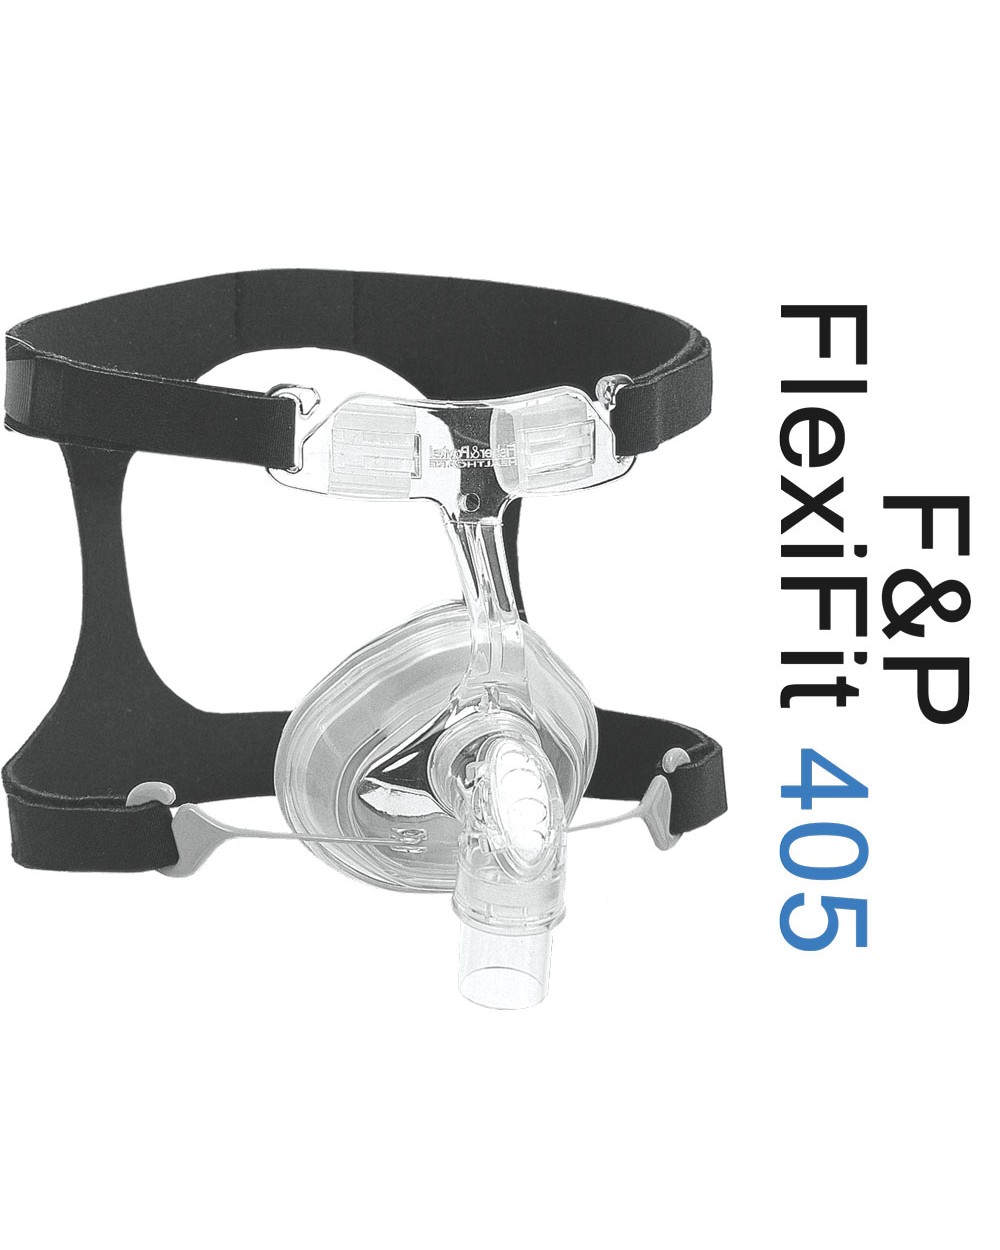 Fisher Paykel FlexiFit 407 – Canadian CPAP Supply